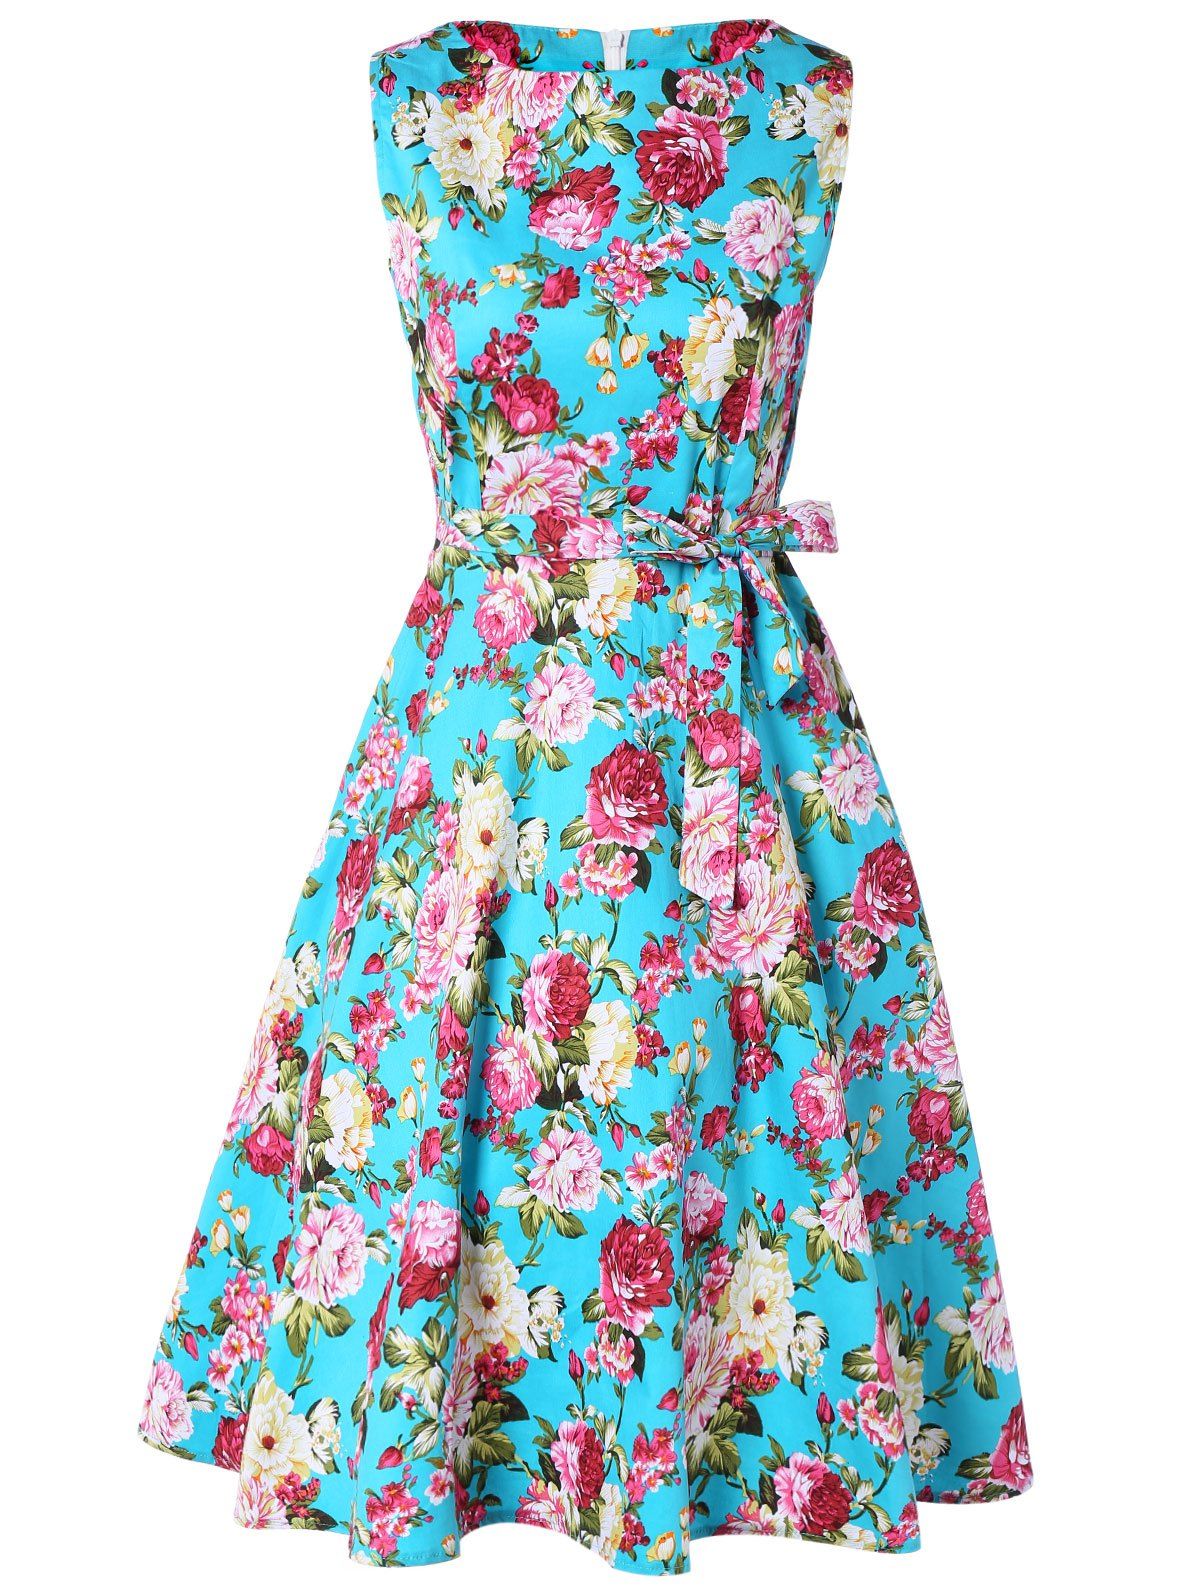 [44% OFF] Retro Floral Printed Sleeveless Pleated A Line Dress | Rosegal